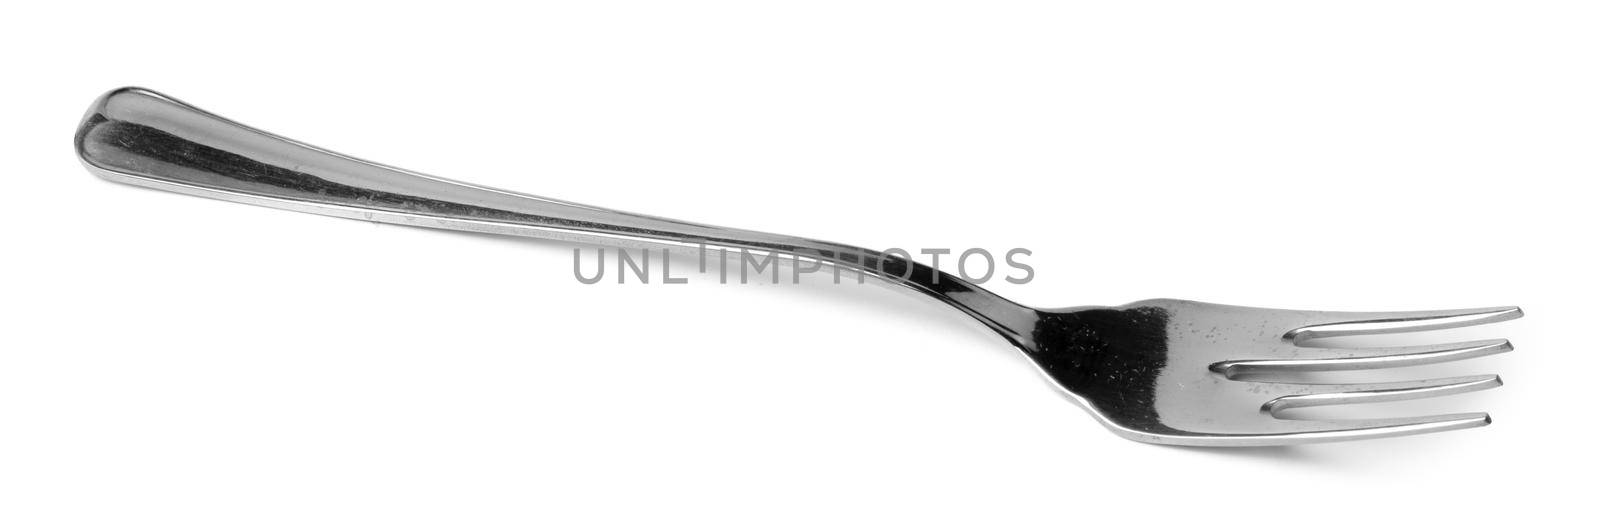 Silver dining fork isolated on white background close up